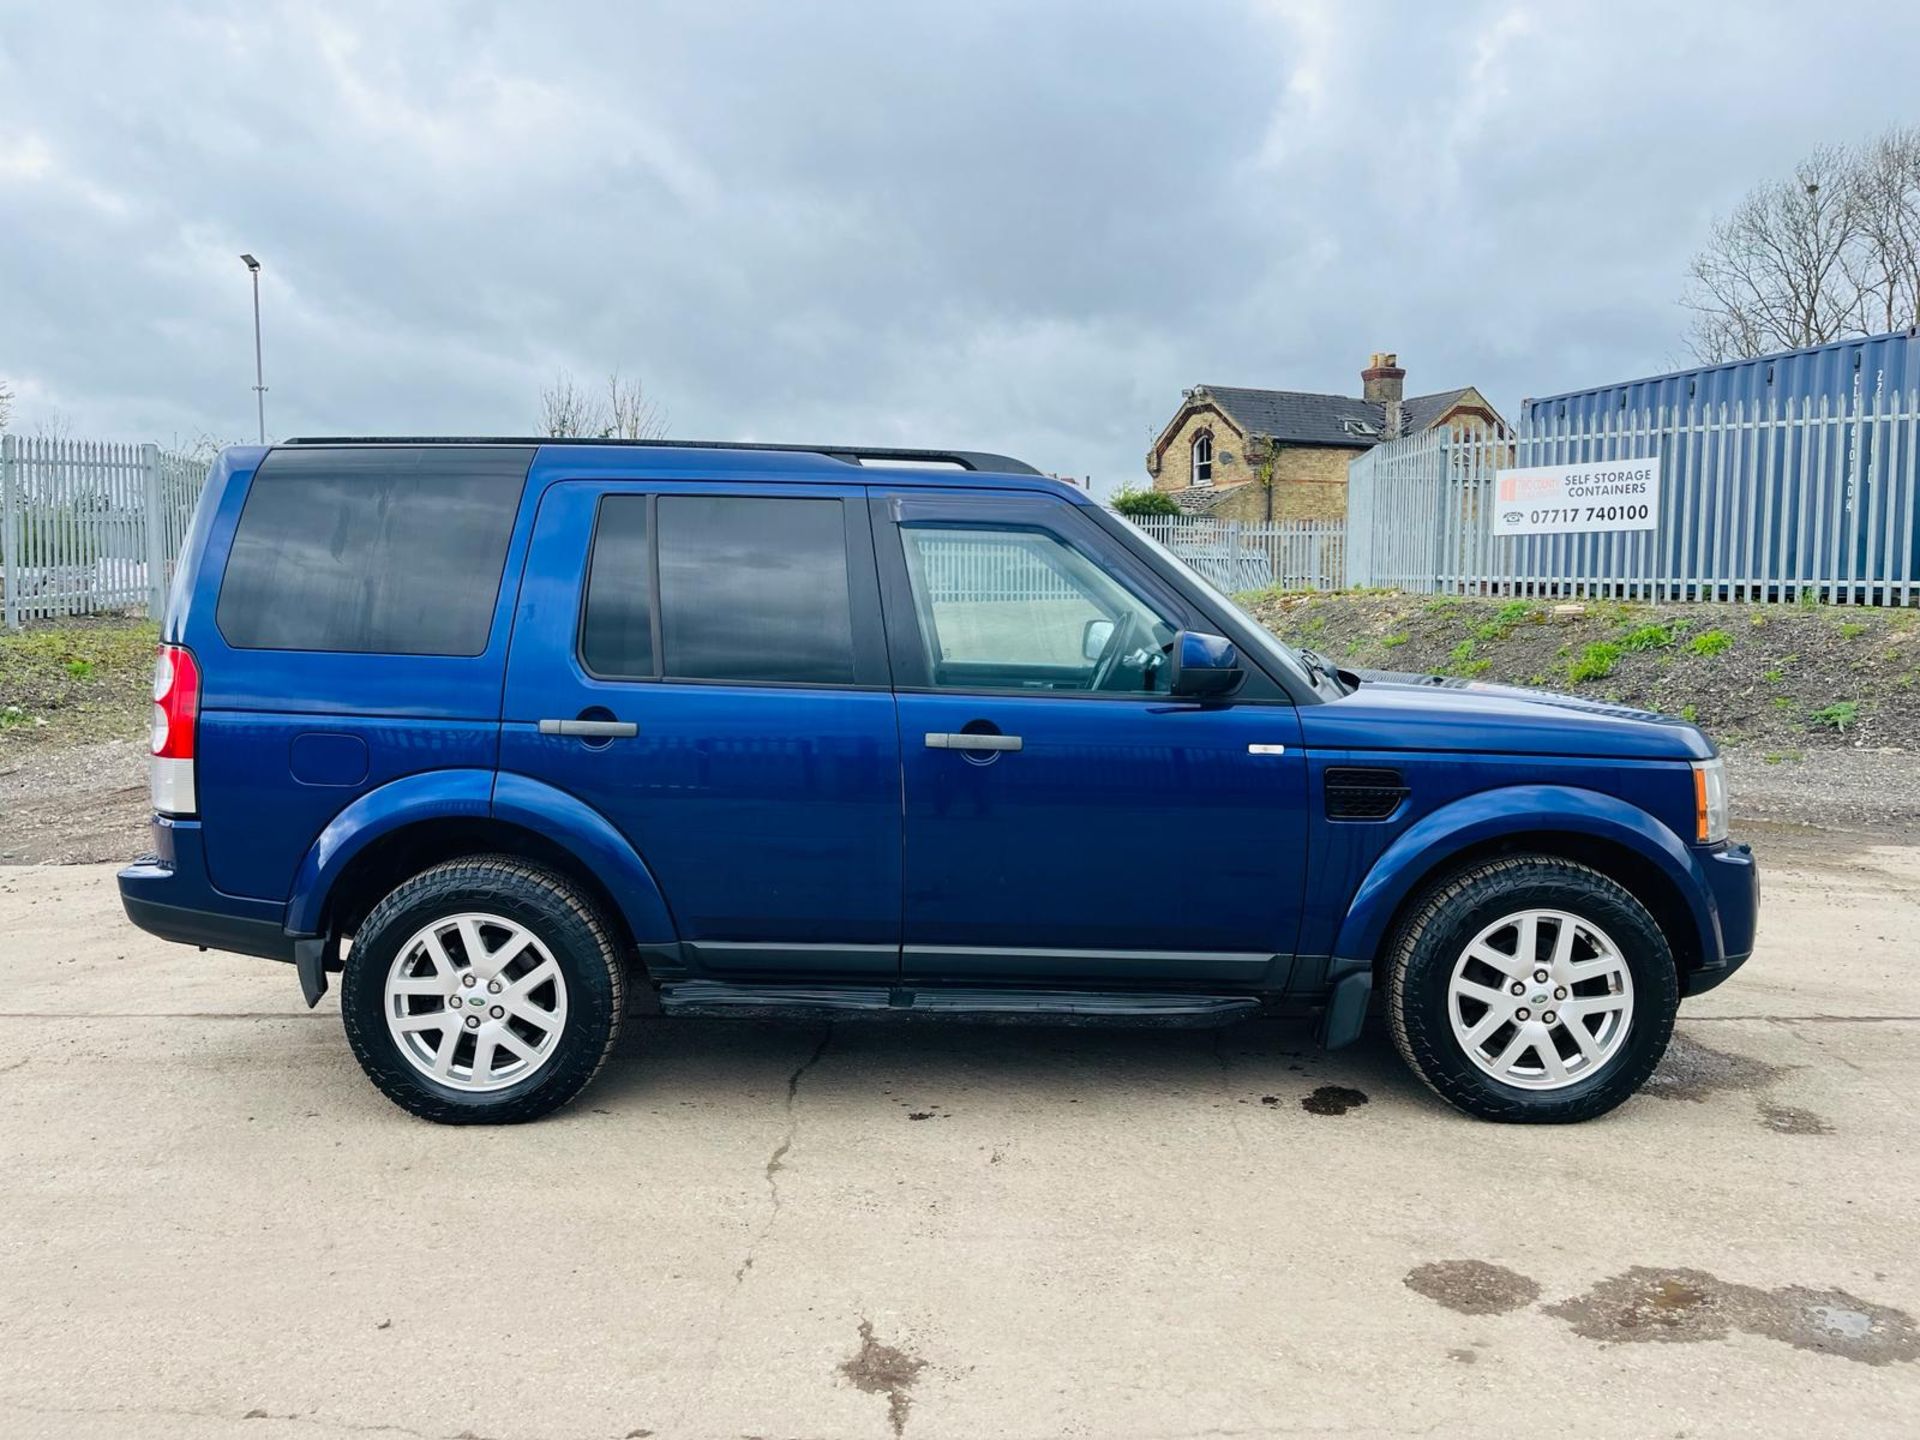 ** ON SALE ** Land Rover Discovery 4 2.7 TDV6 Commercial Van Auto -A/C-Sat Nav-Bluetooth Handsfree - Image 11 of 31